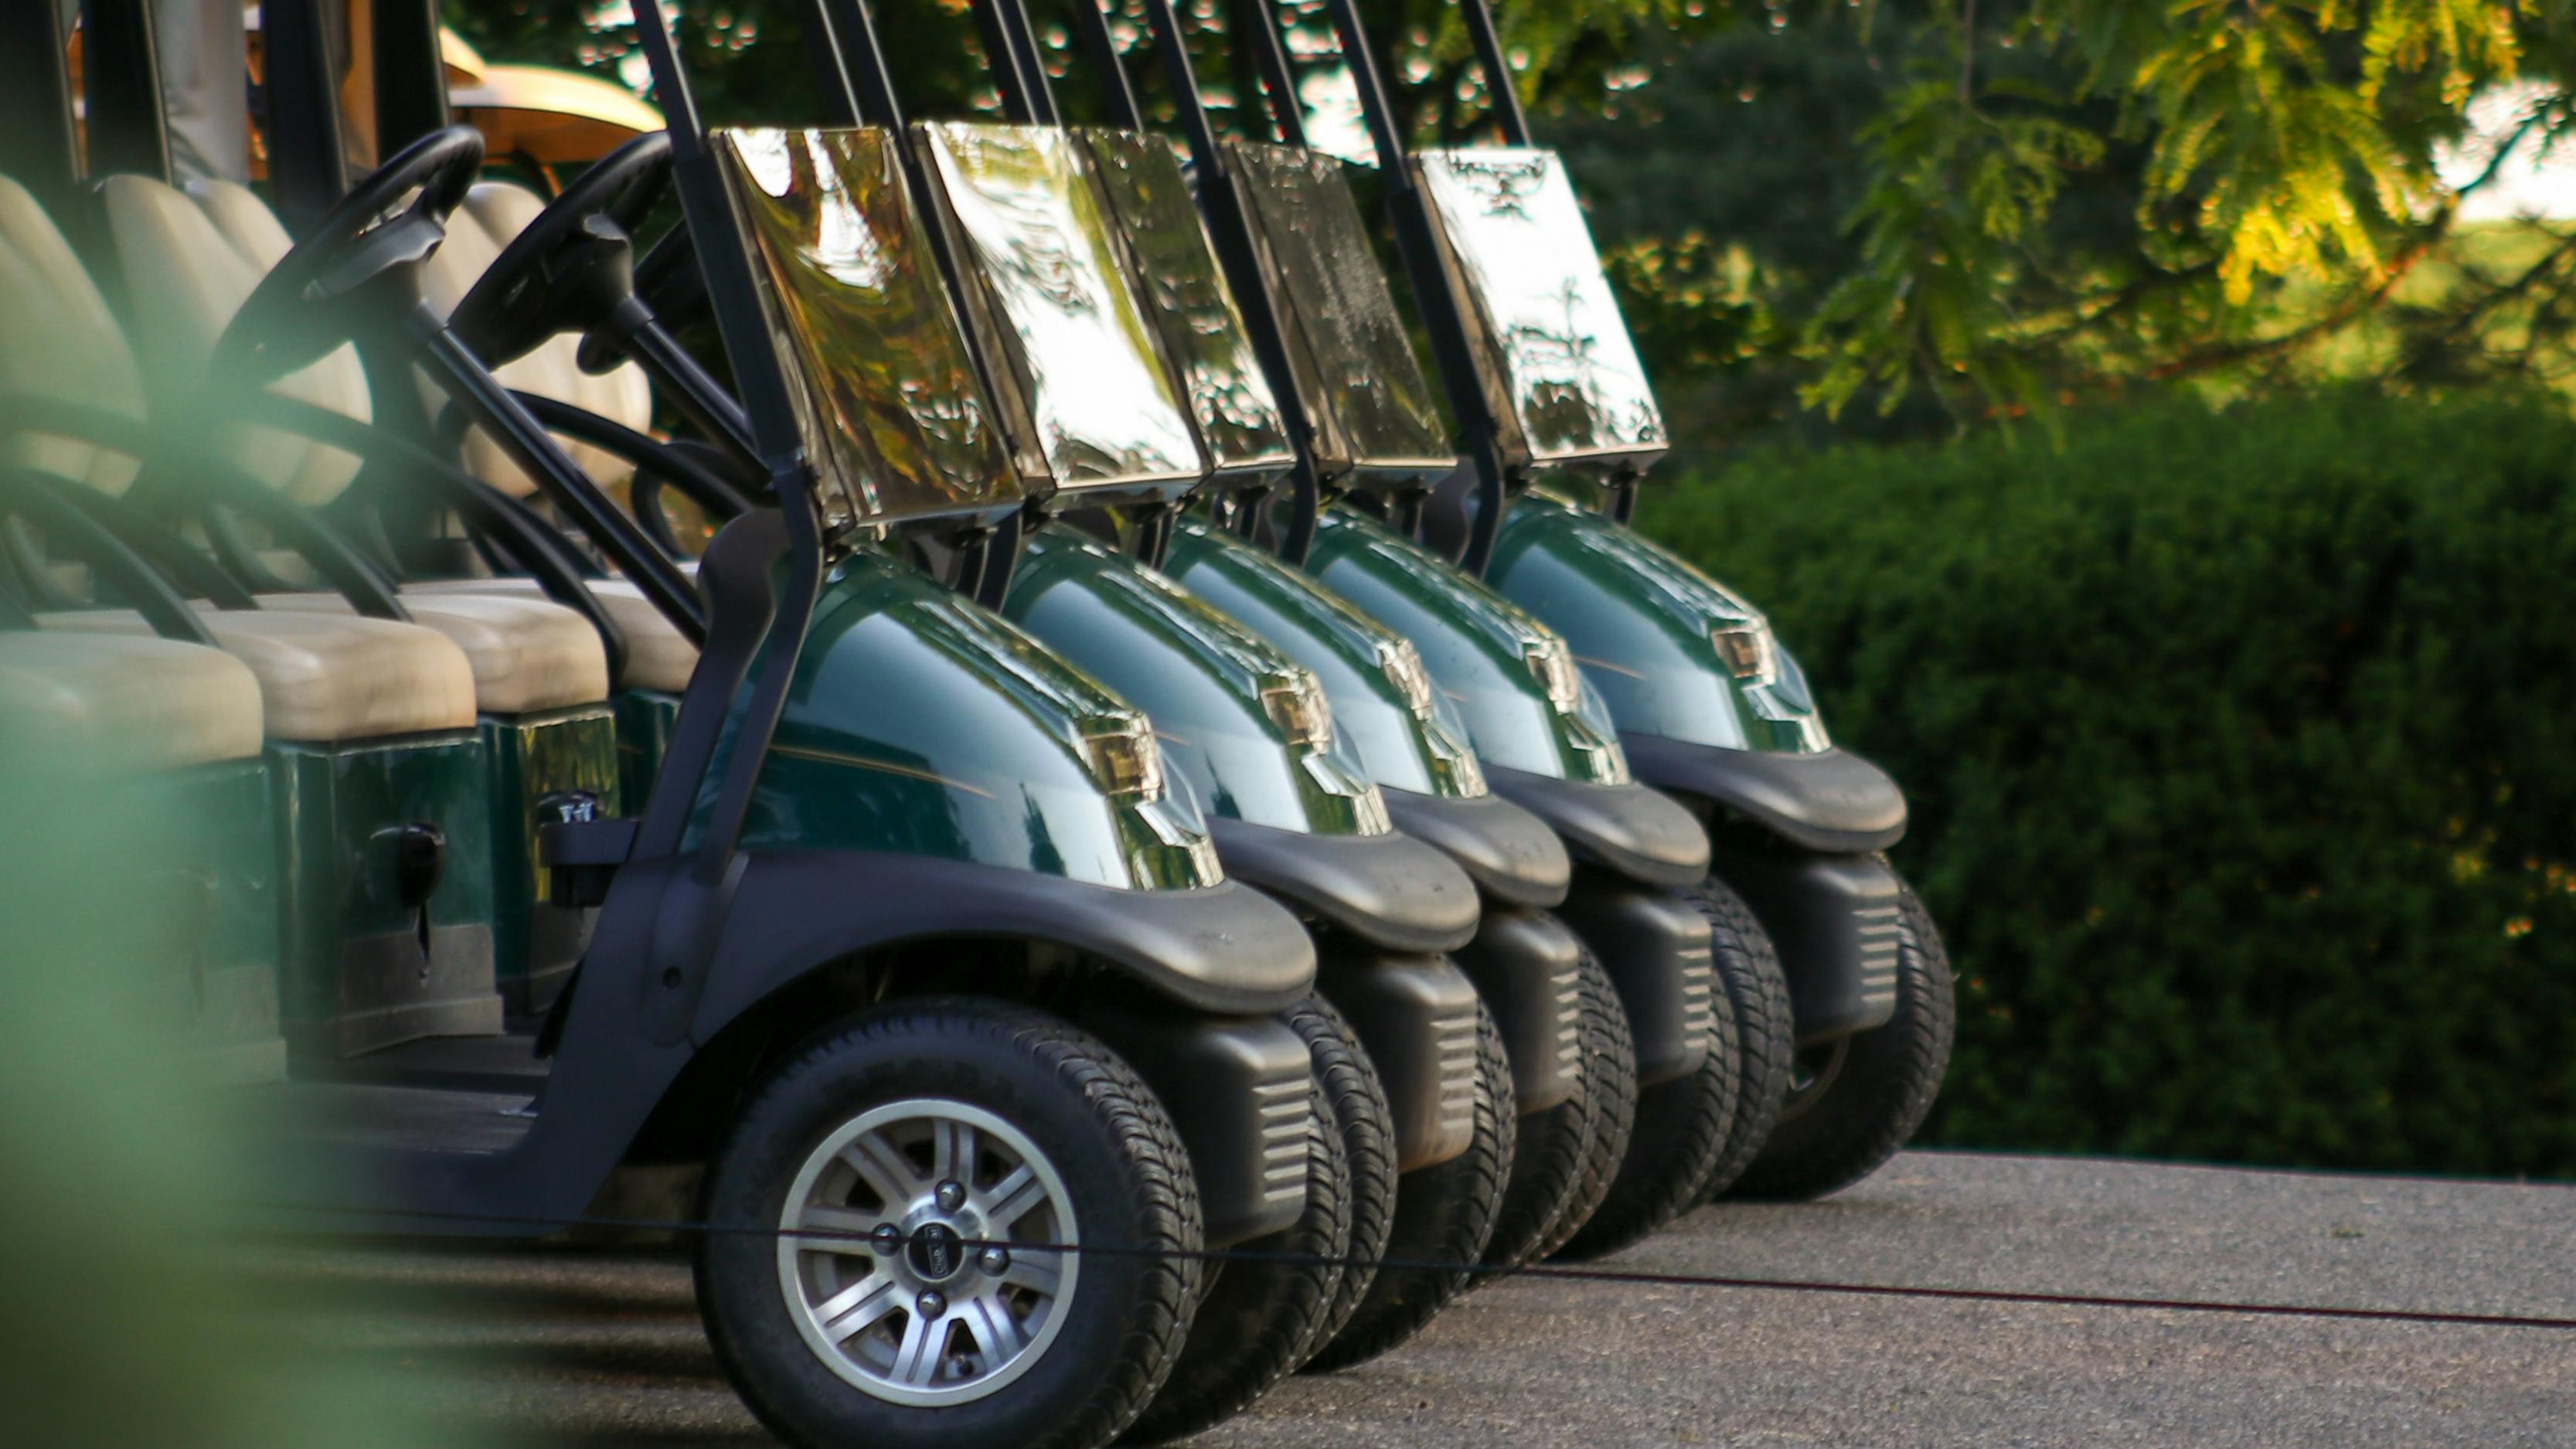 Golf carts all parked in a line.